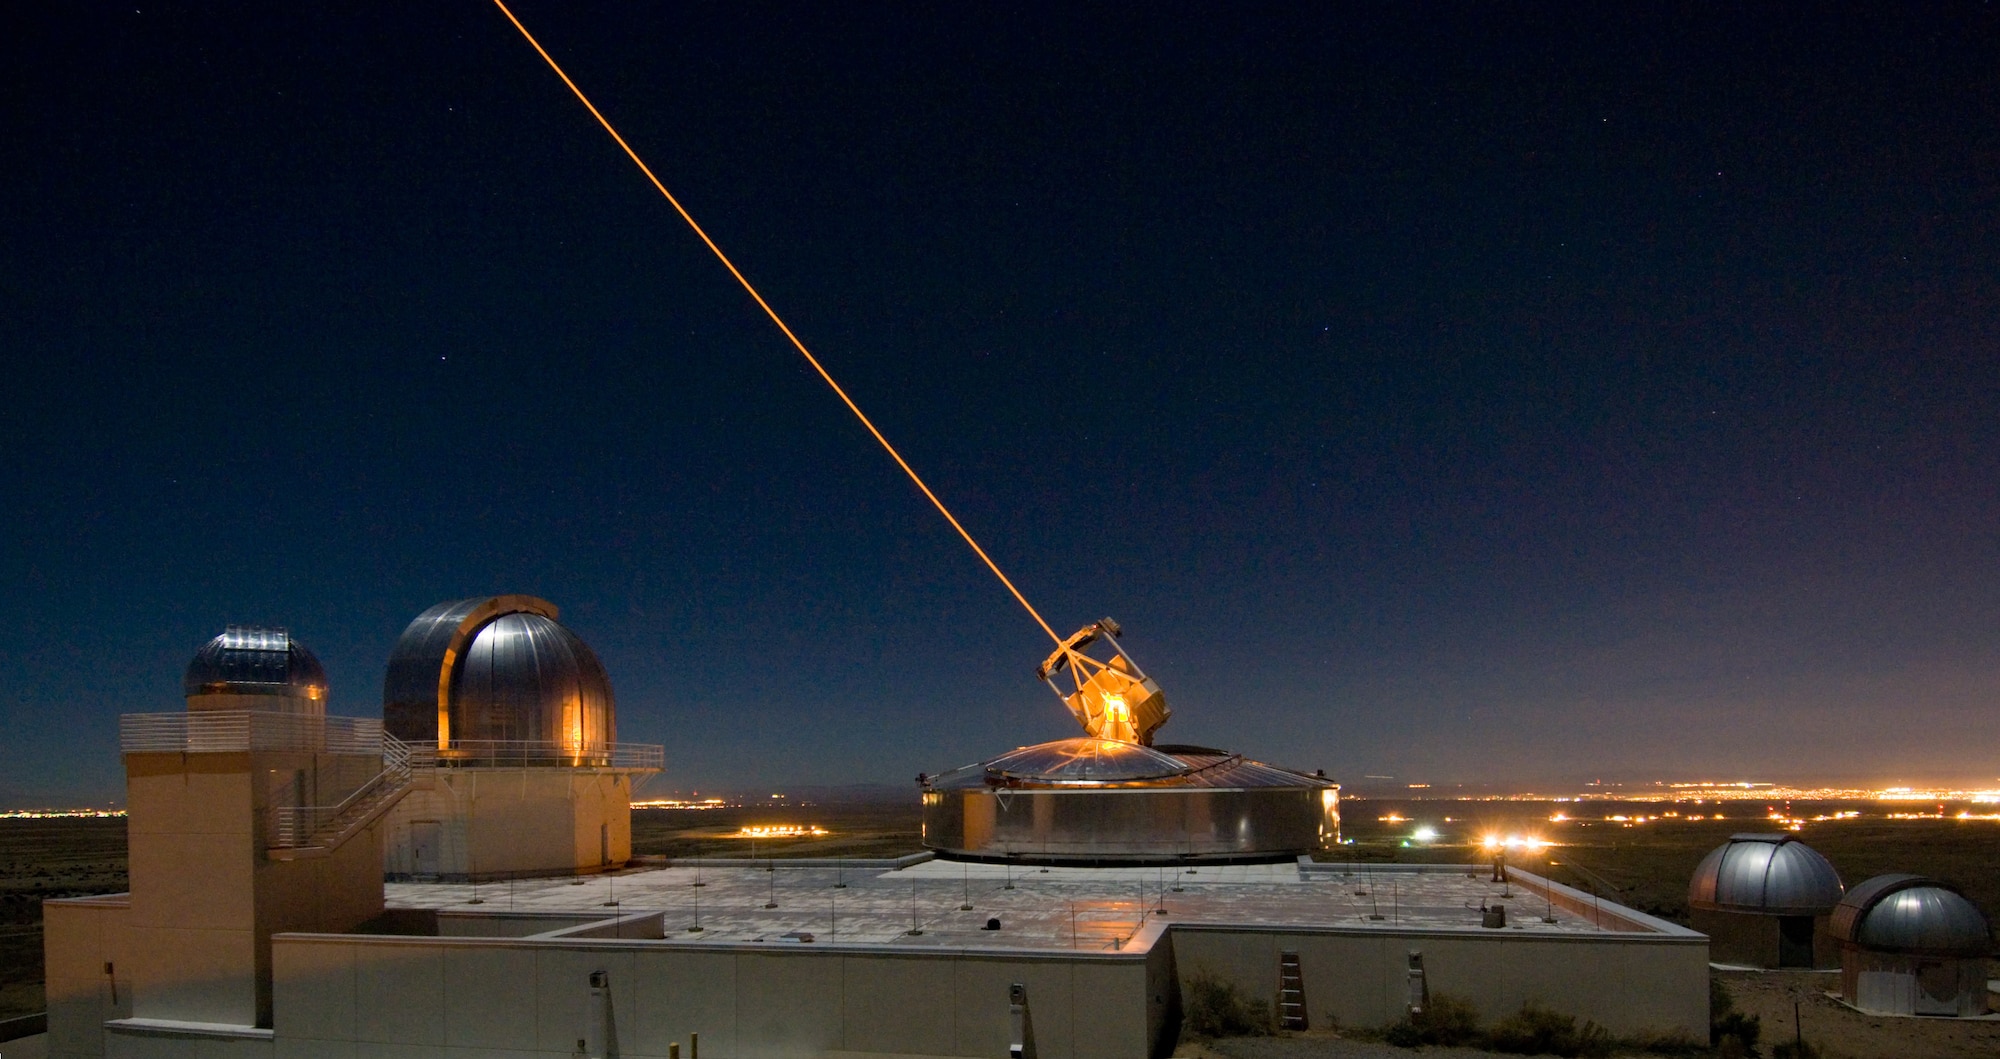 The Sodium Guidestar at the Air Force Research Laboratory's Starfire Optical Range resides on a 6,240 foot hilltop at Kirtland Air Force Base, N.M. The Army and Navy is developing its own laser weapons systems. (U.S. Air Force photo)